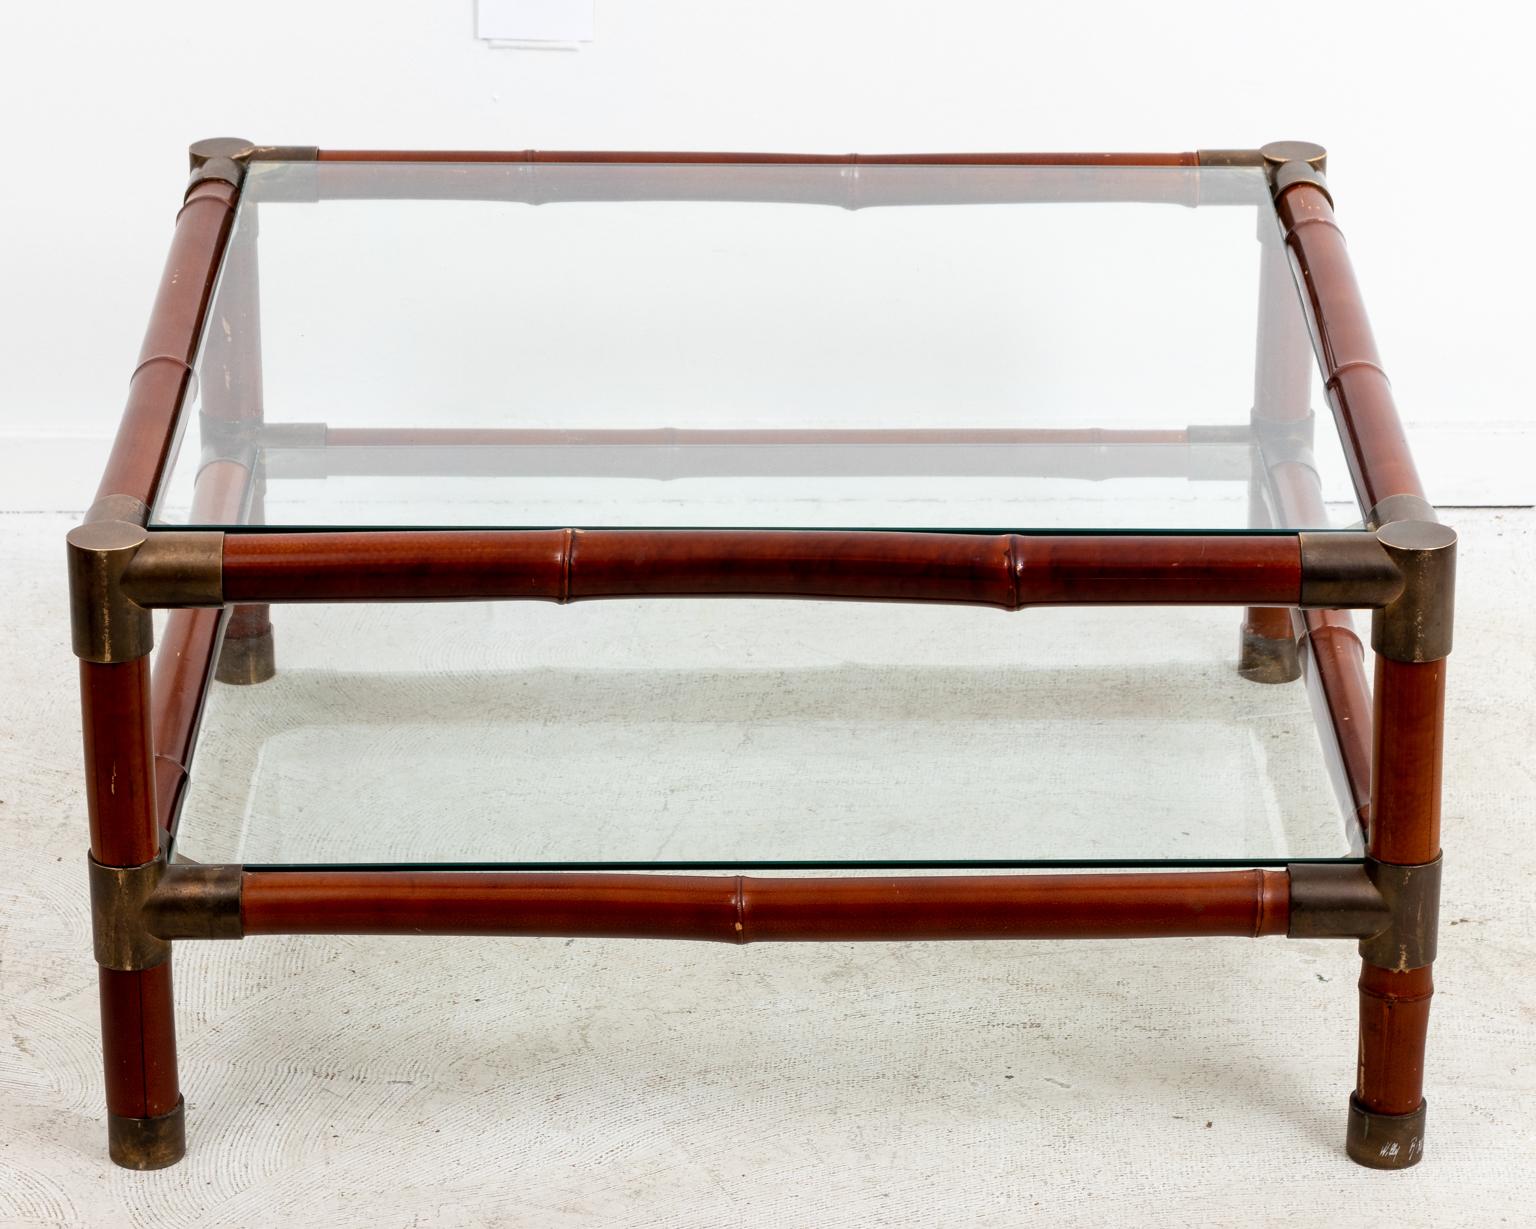 Large brass banded two tier square coffee table with glass top by Willy Rizzo. Please note of wear consistent with age including chips and minor finish loss to the faux bamboo finished frame along with minor patina to the brass bands.